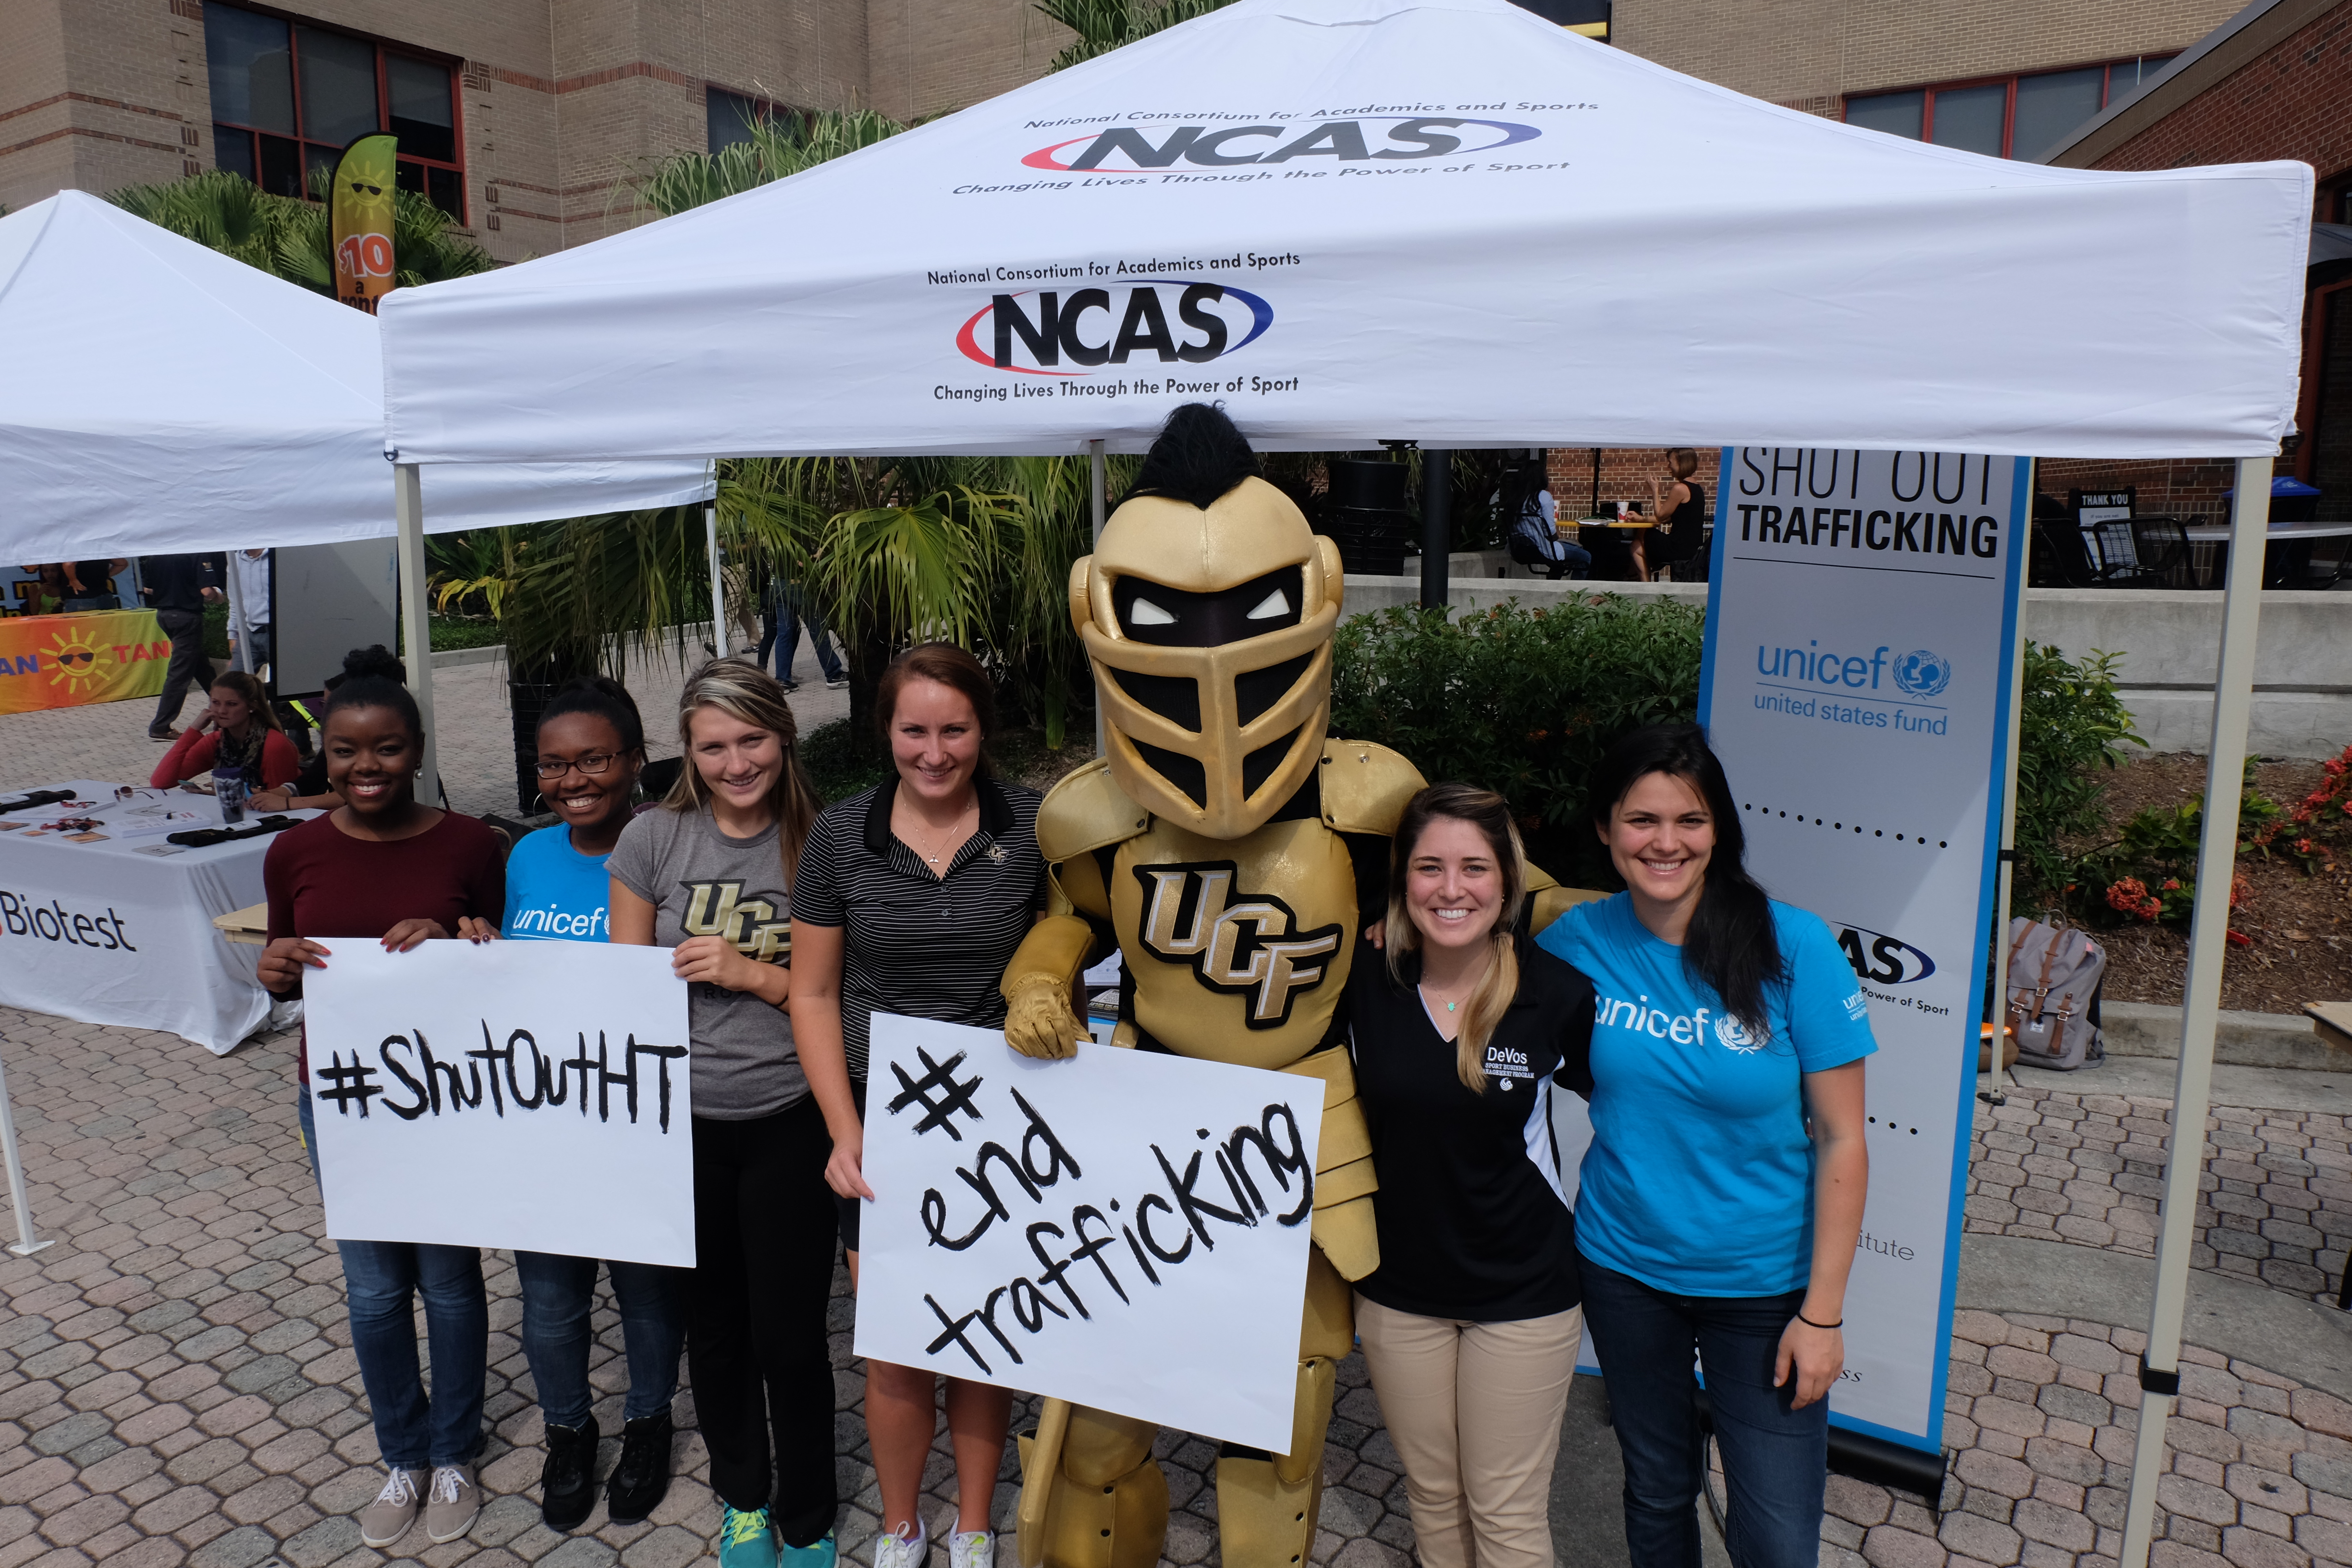 Shut Out Trafficking Volunteers at UCF pose with Knightro